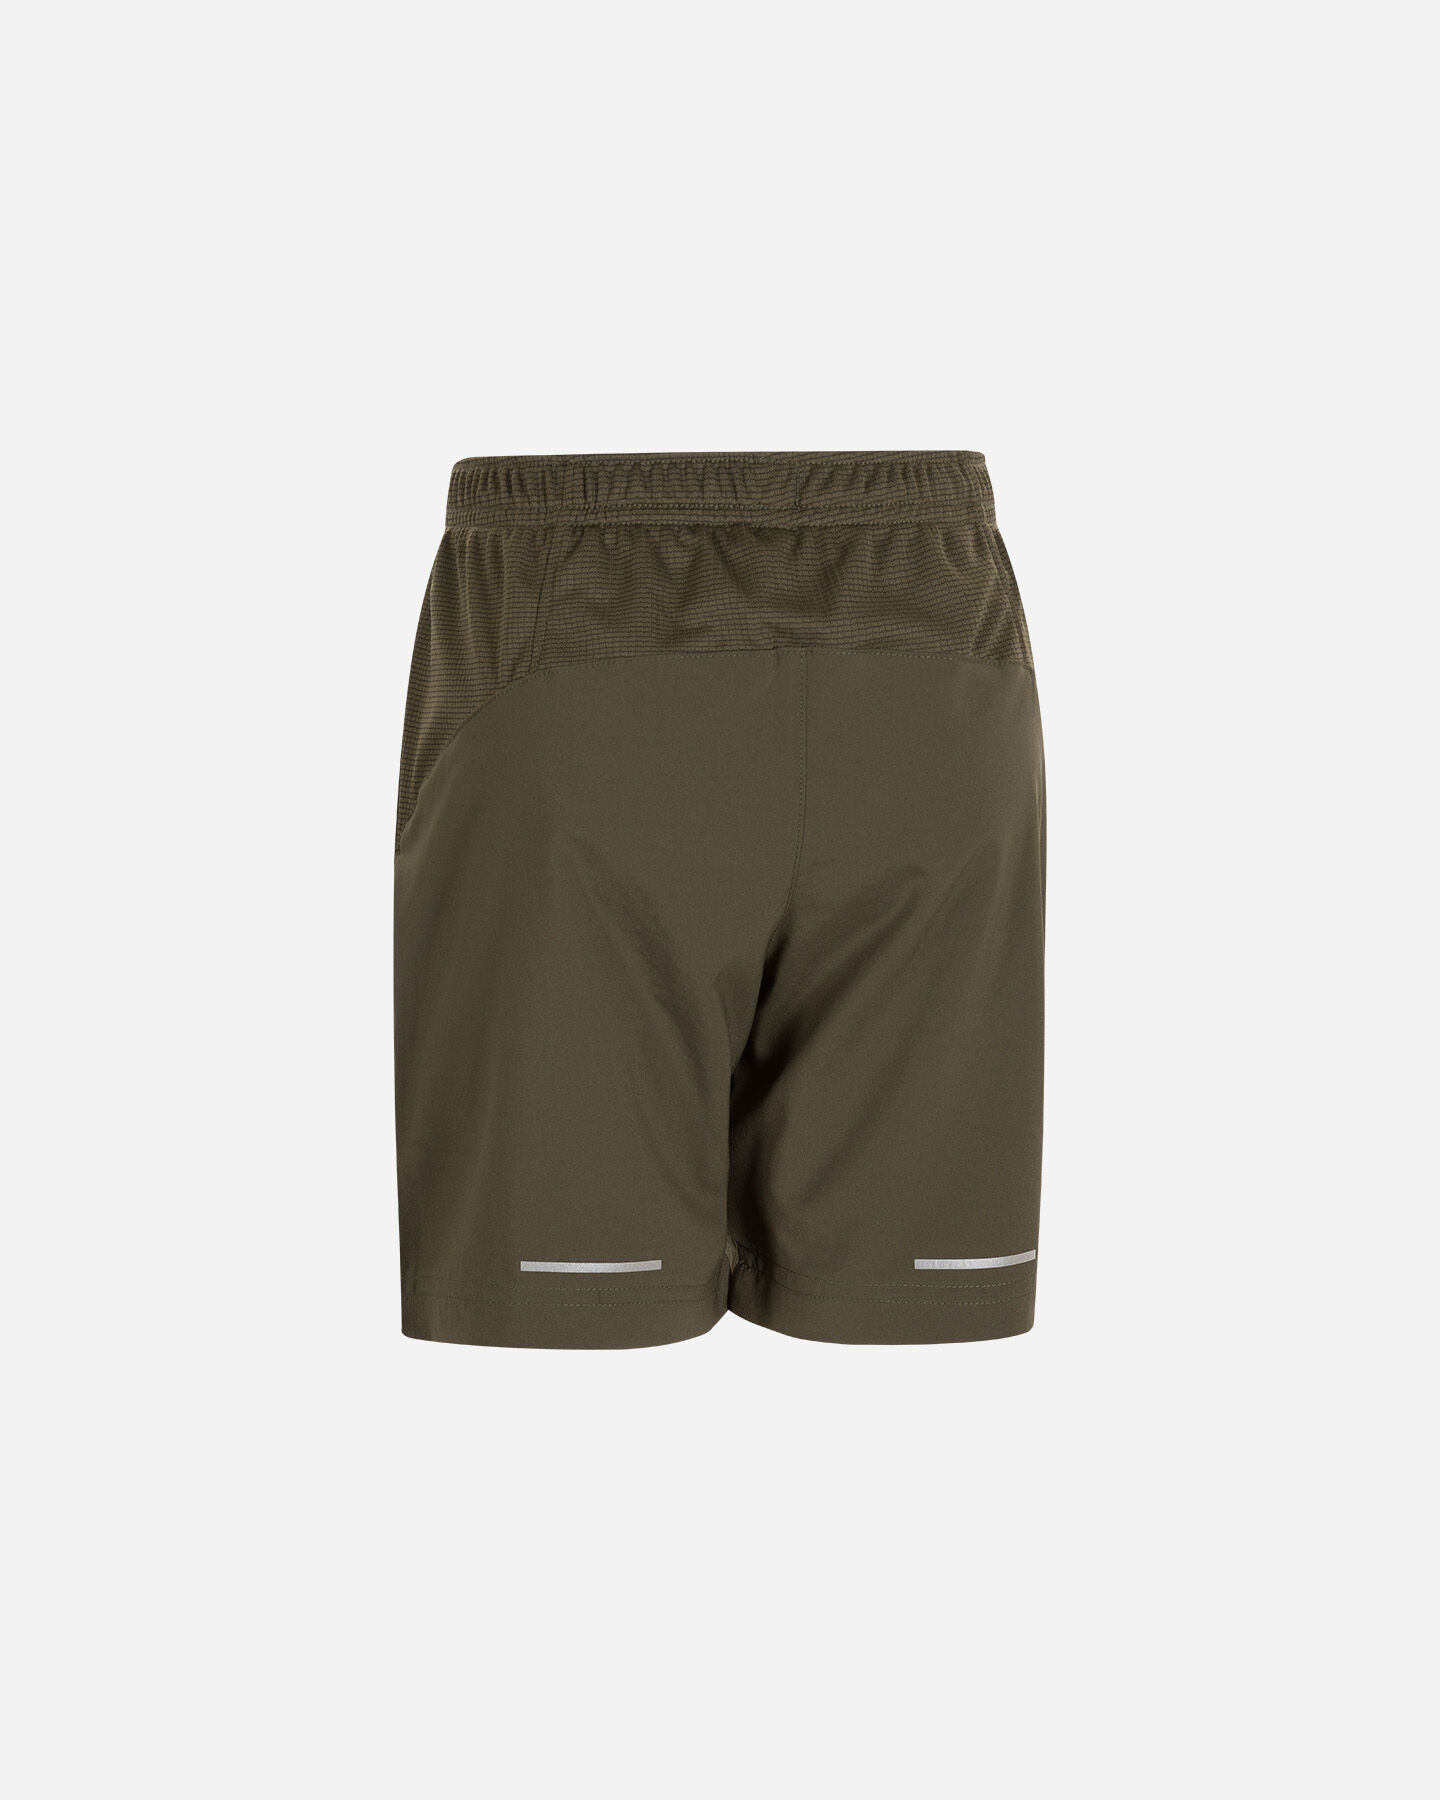  Pantaloncini THE NORTH FACE REACTOR  JR S5422788|21L|REGS scatto 1